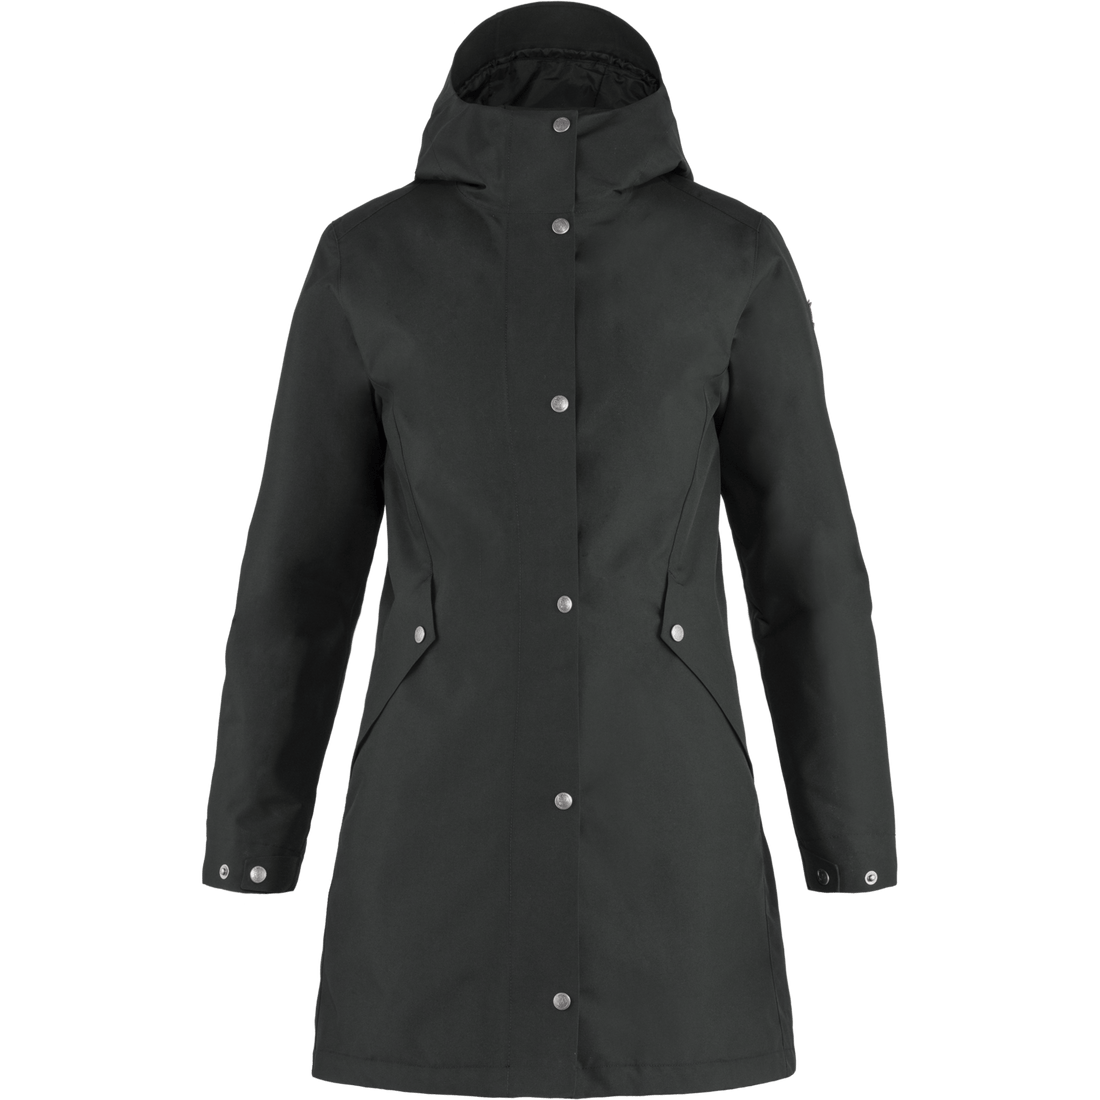 Visby 3 in 1 Jacket W